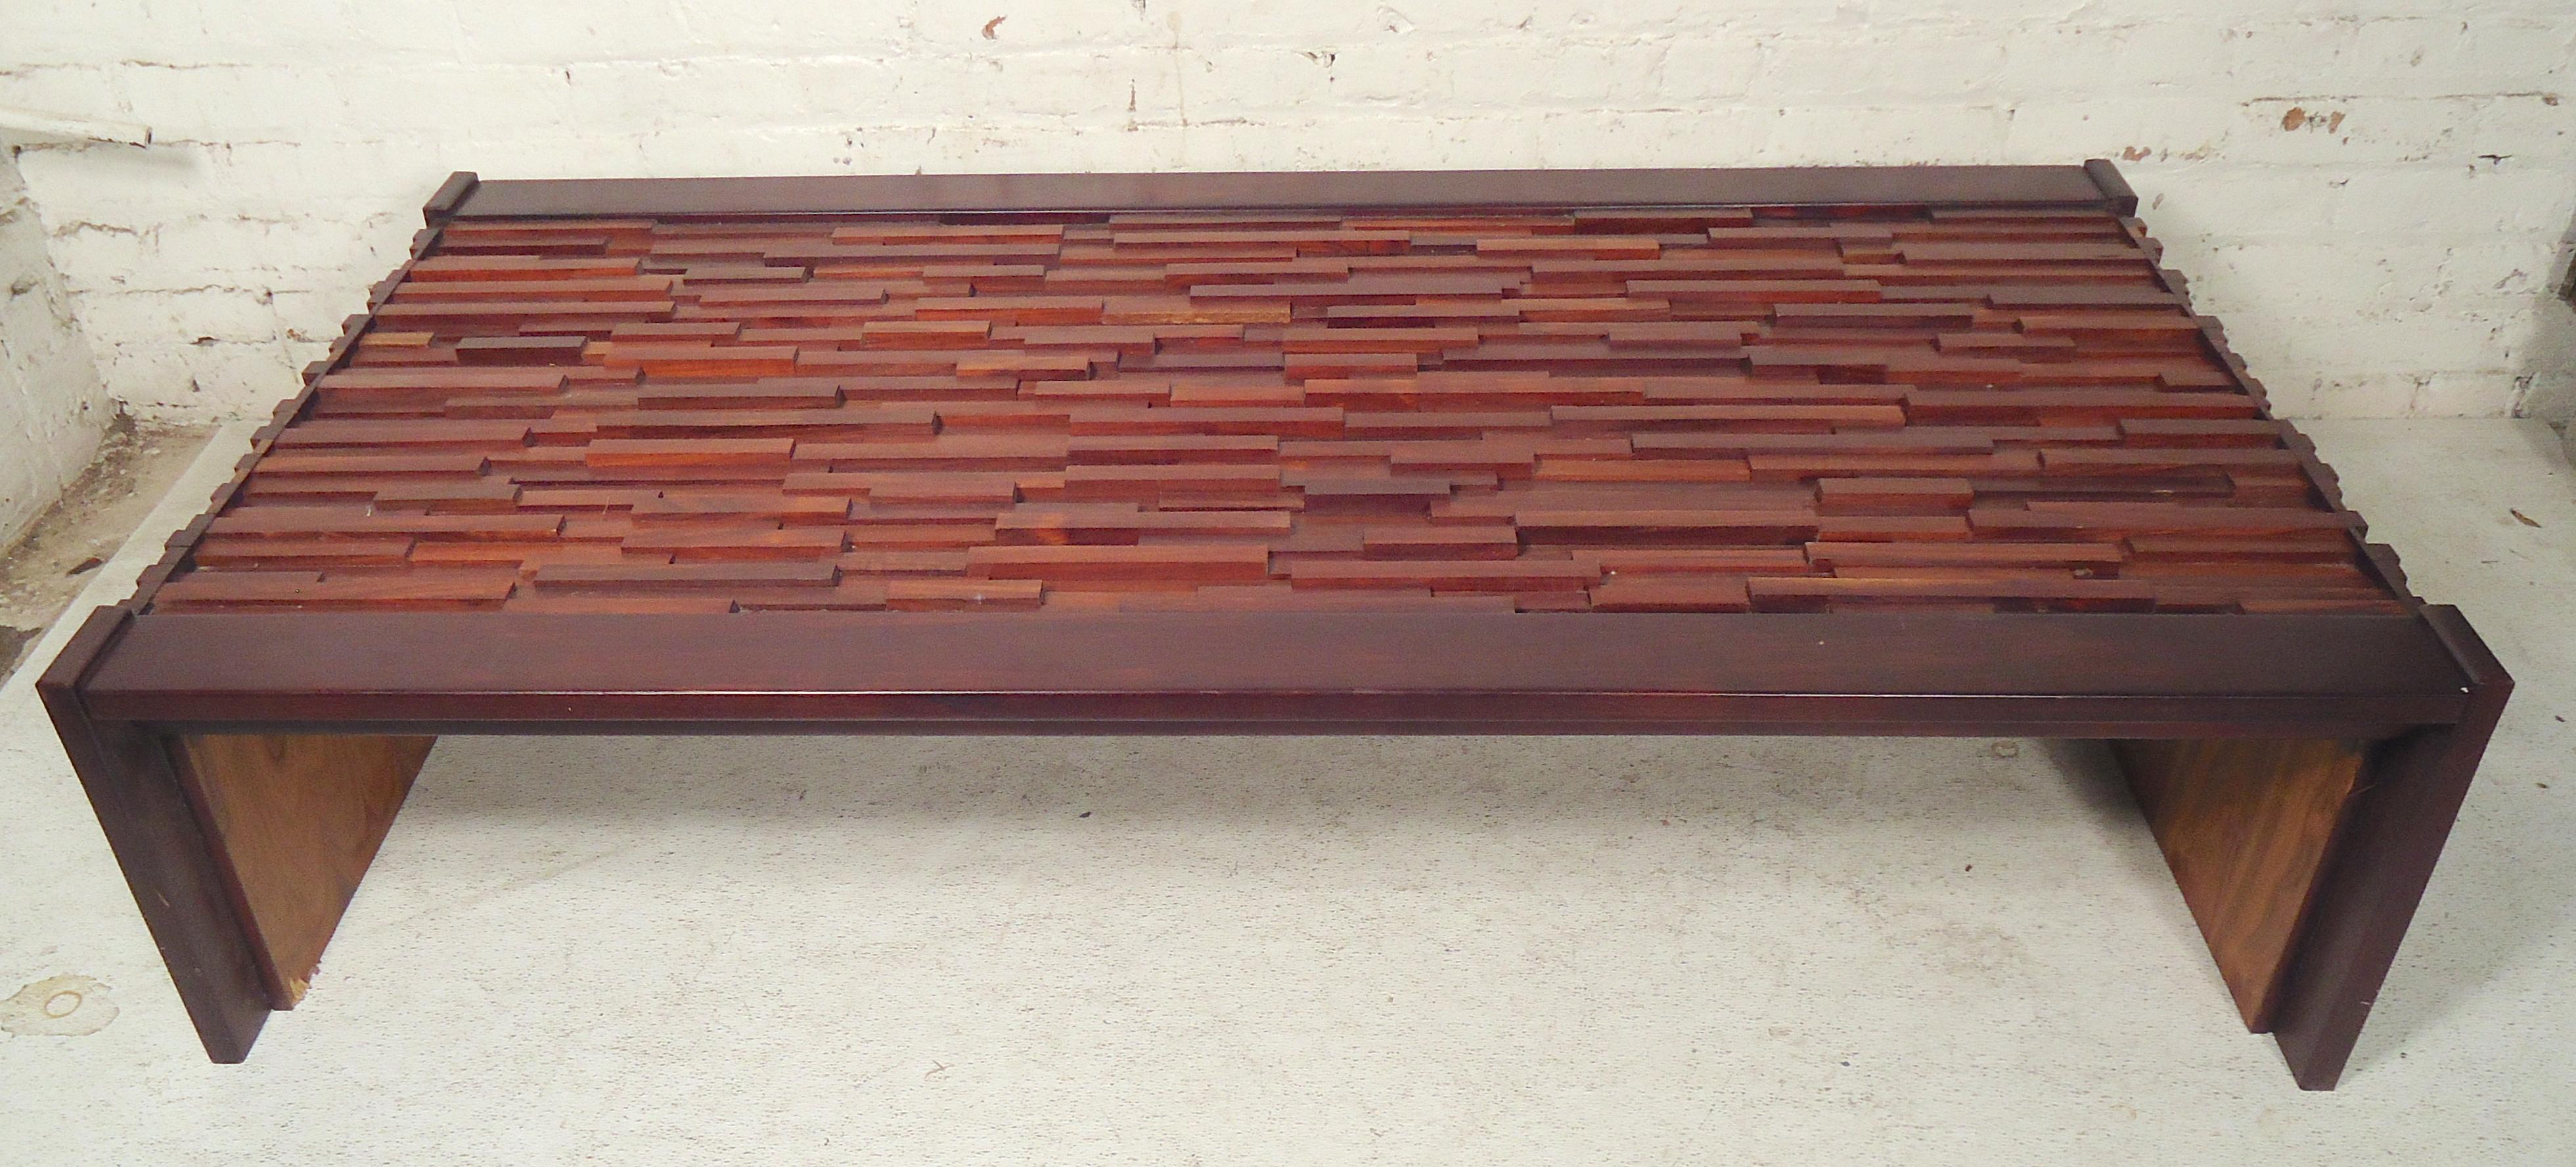 Mid-Century Modern coffee table with brutalist style. Features a sculptural relief design throughout.
(Please confirm item location - NY or NJ - with dealer).
 